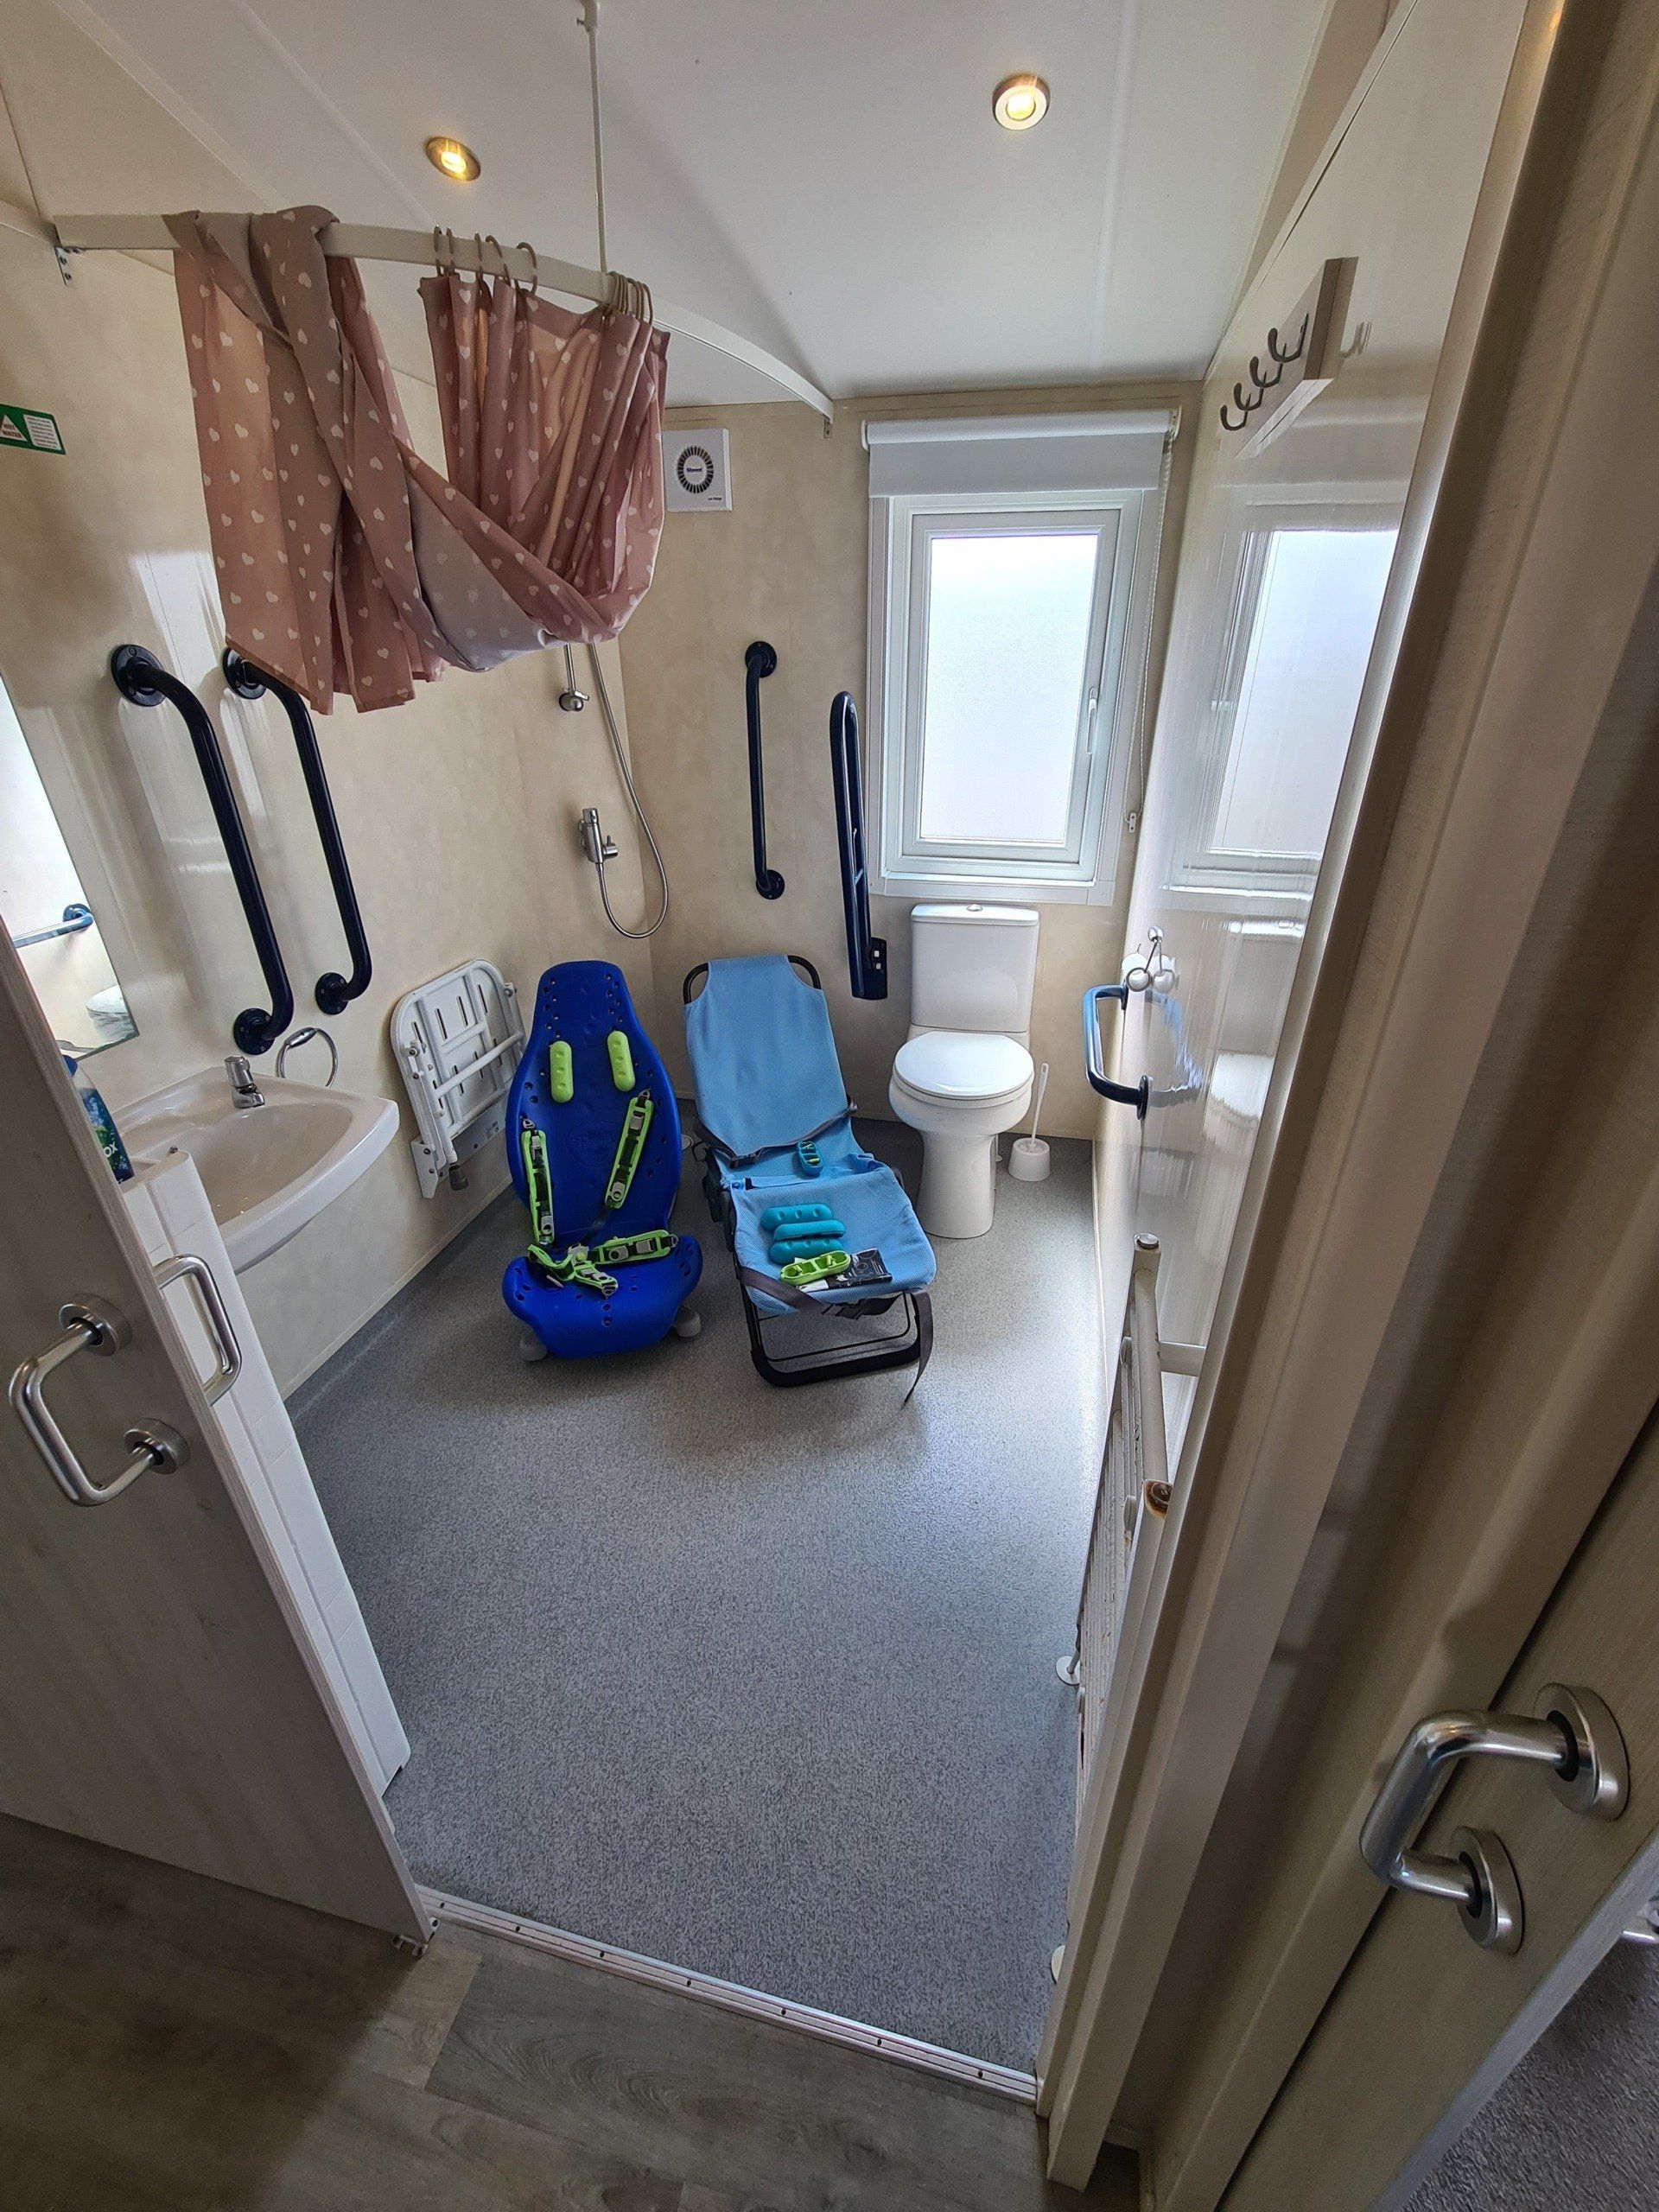 a view of the wetroom showing the two childrens shower seats